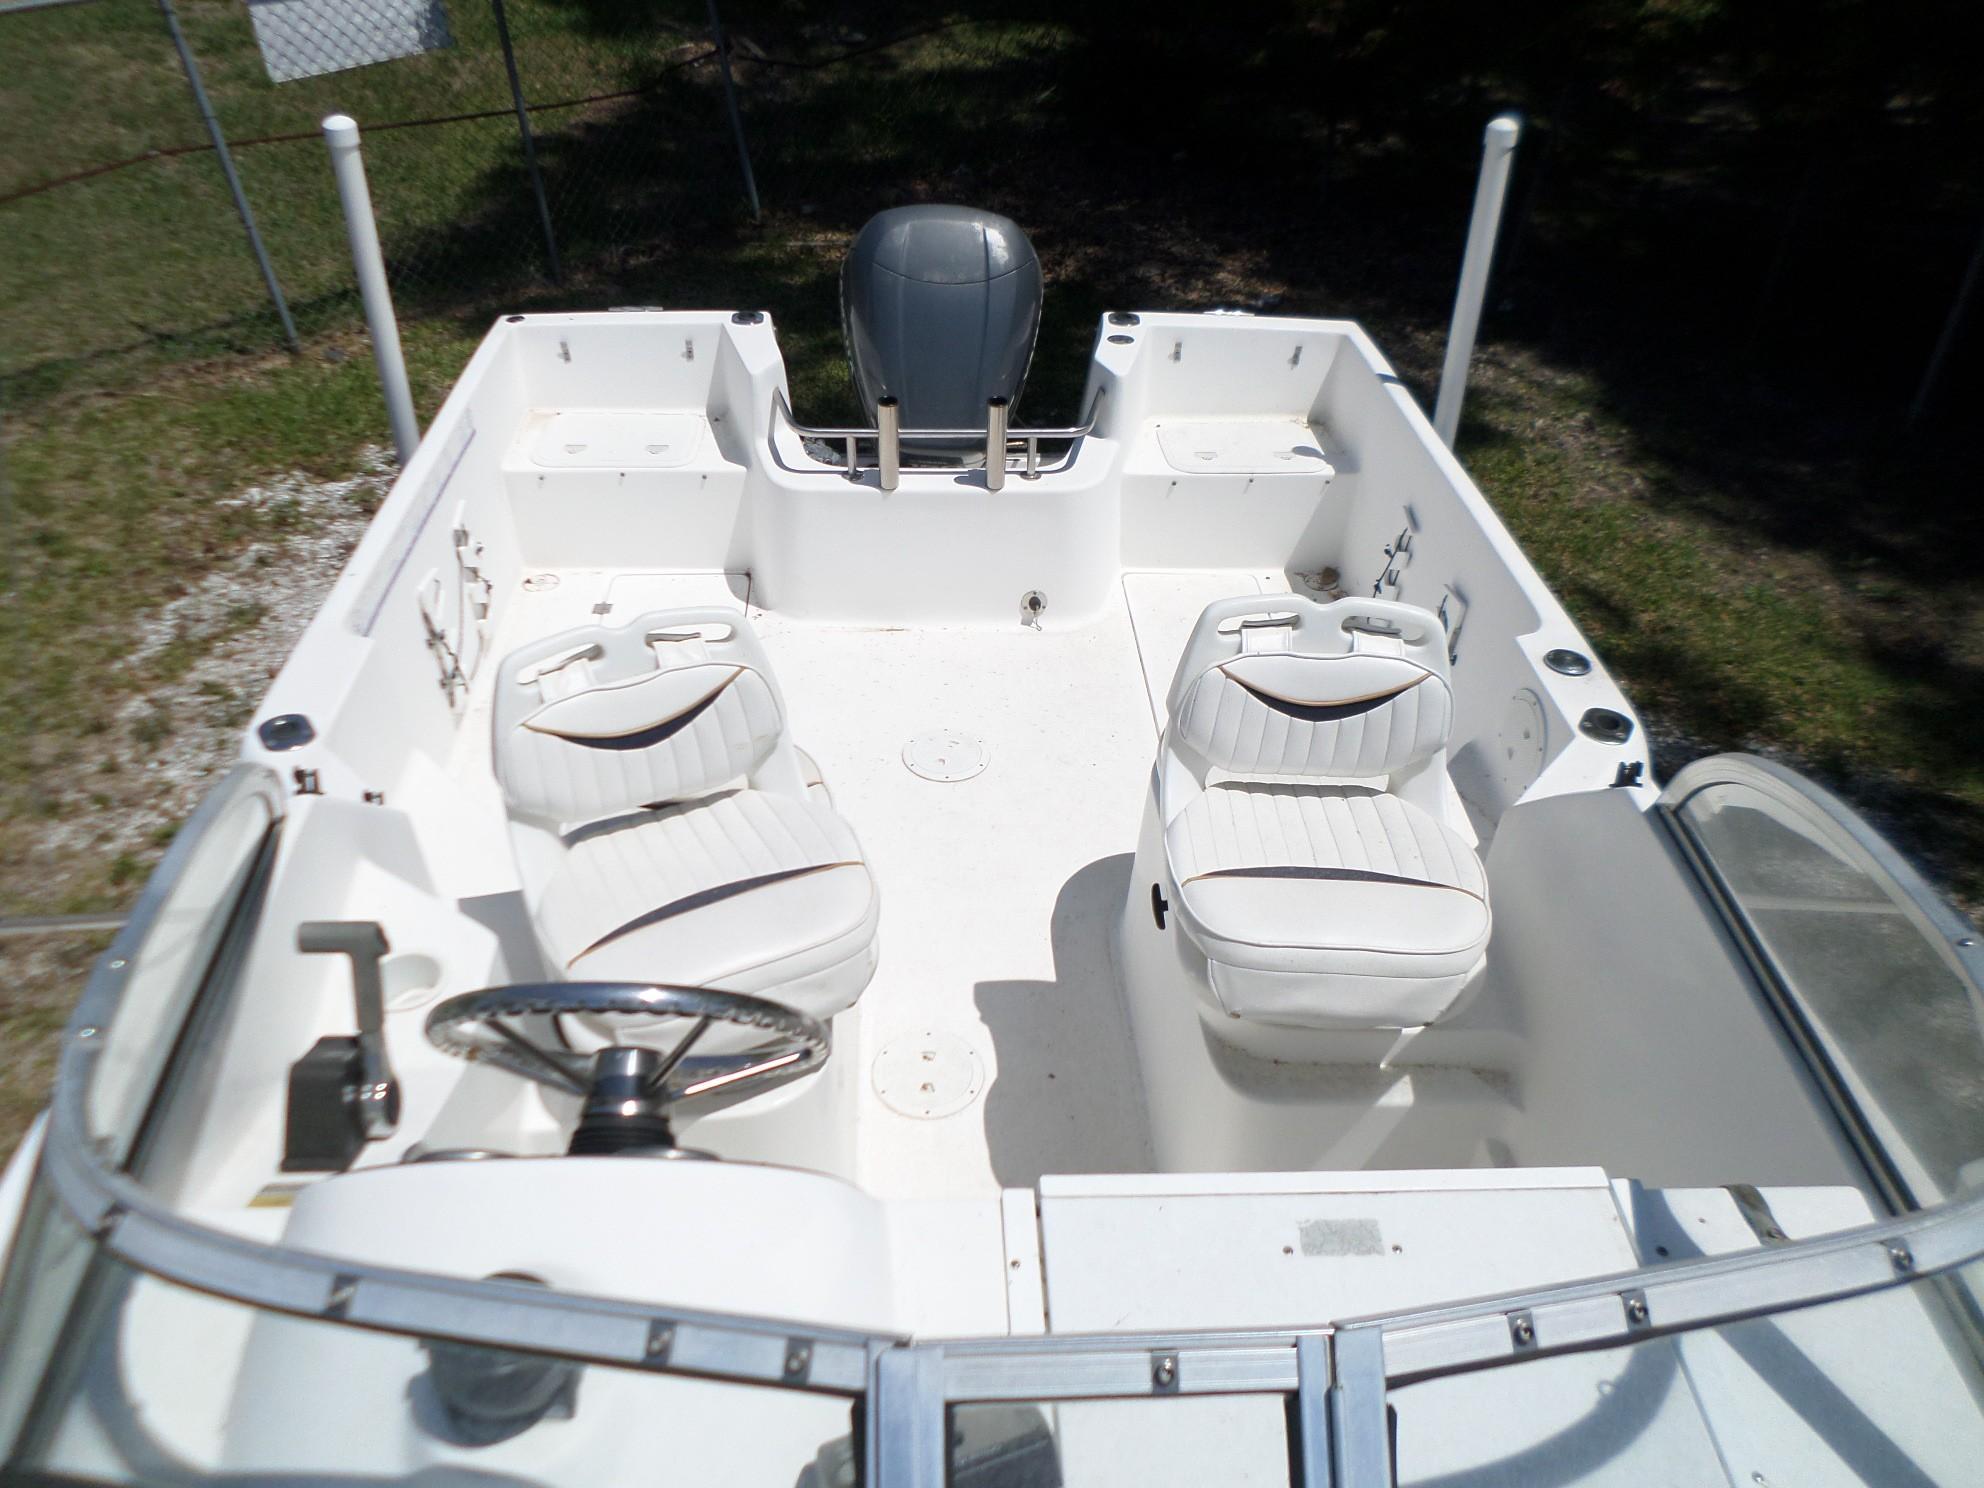 Used 2003 21' Pro Sports 2050 WA Saltwater Offshore Fishing in Slidell, Louisiana1984 x 1488